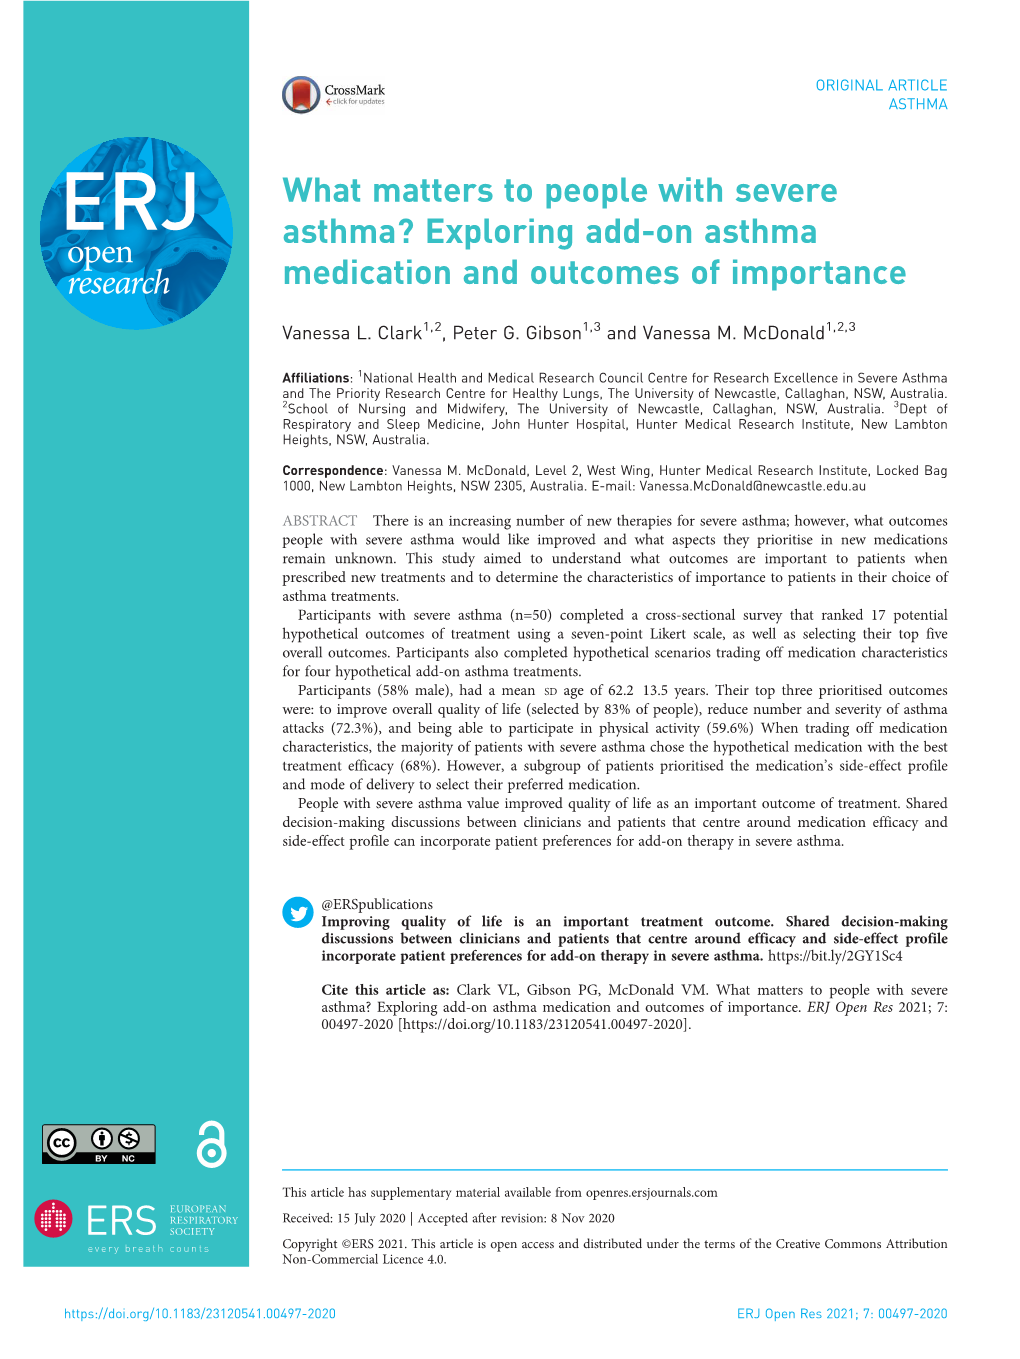 Exploring Add-On Asthma Medication and Outcomes of Importance